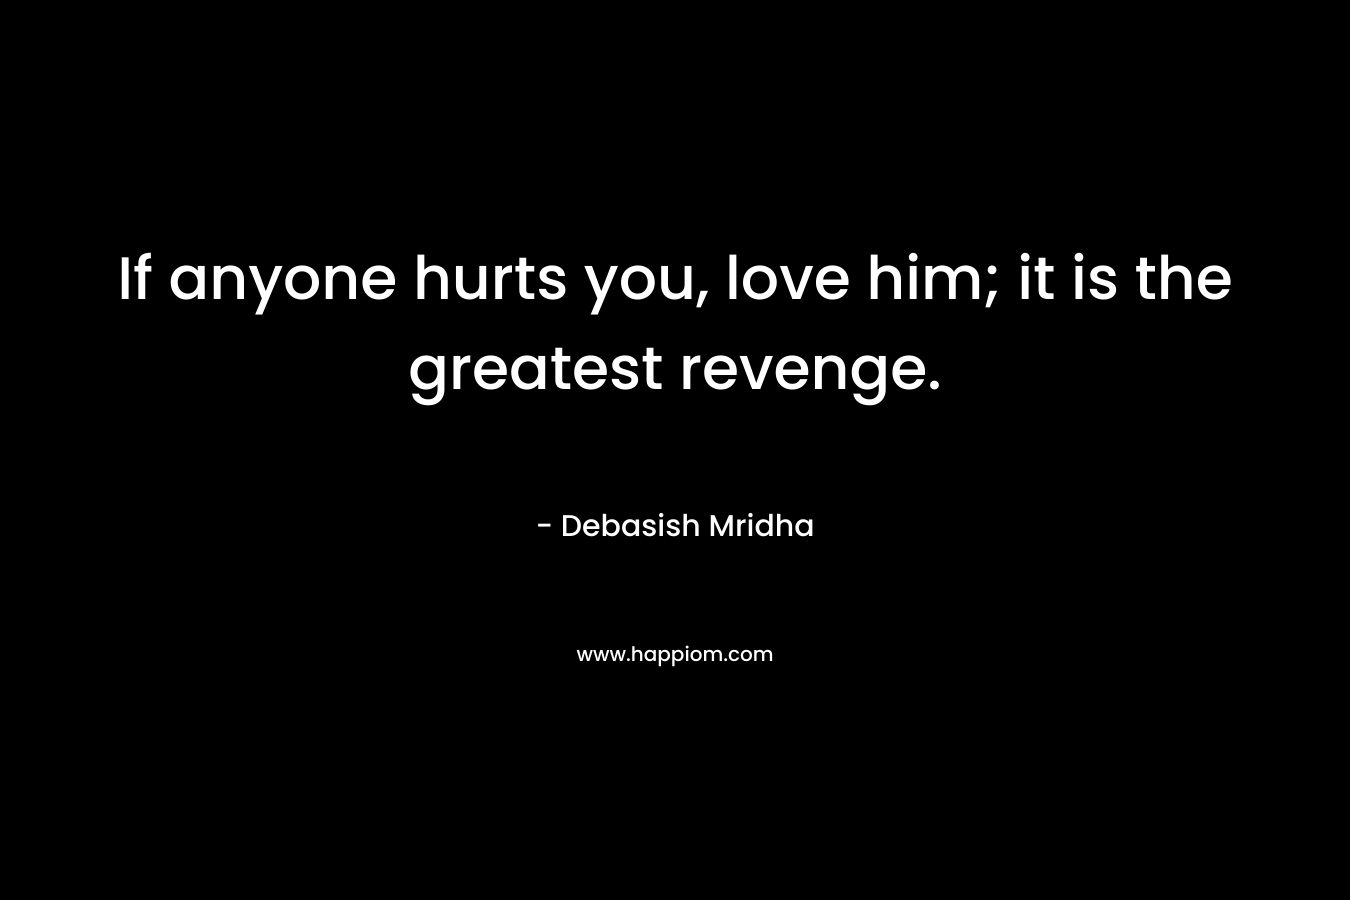 If anyone hurts you, love him; it is the greatest revenge.